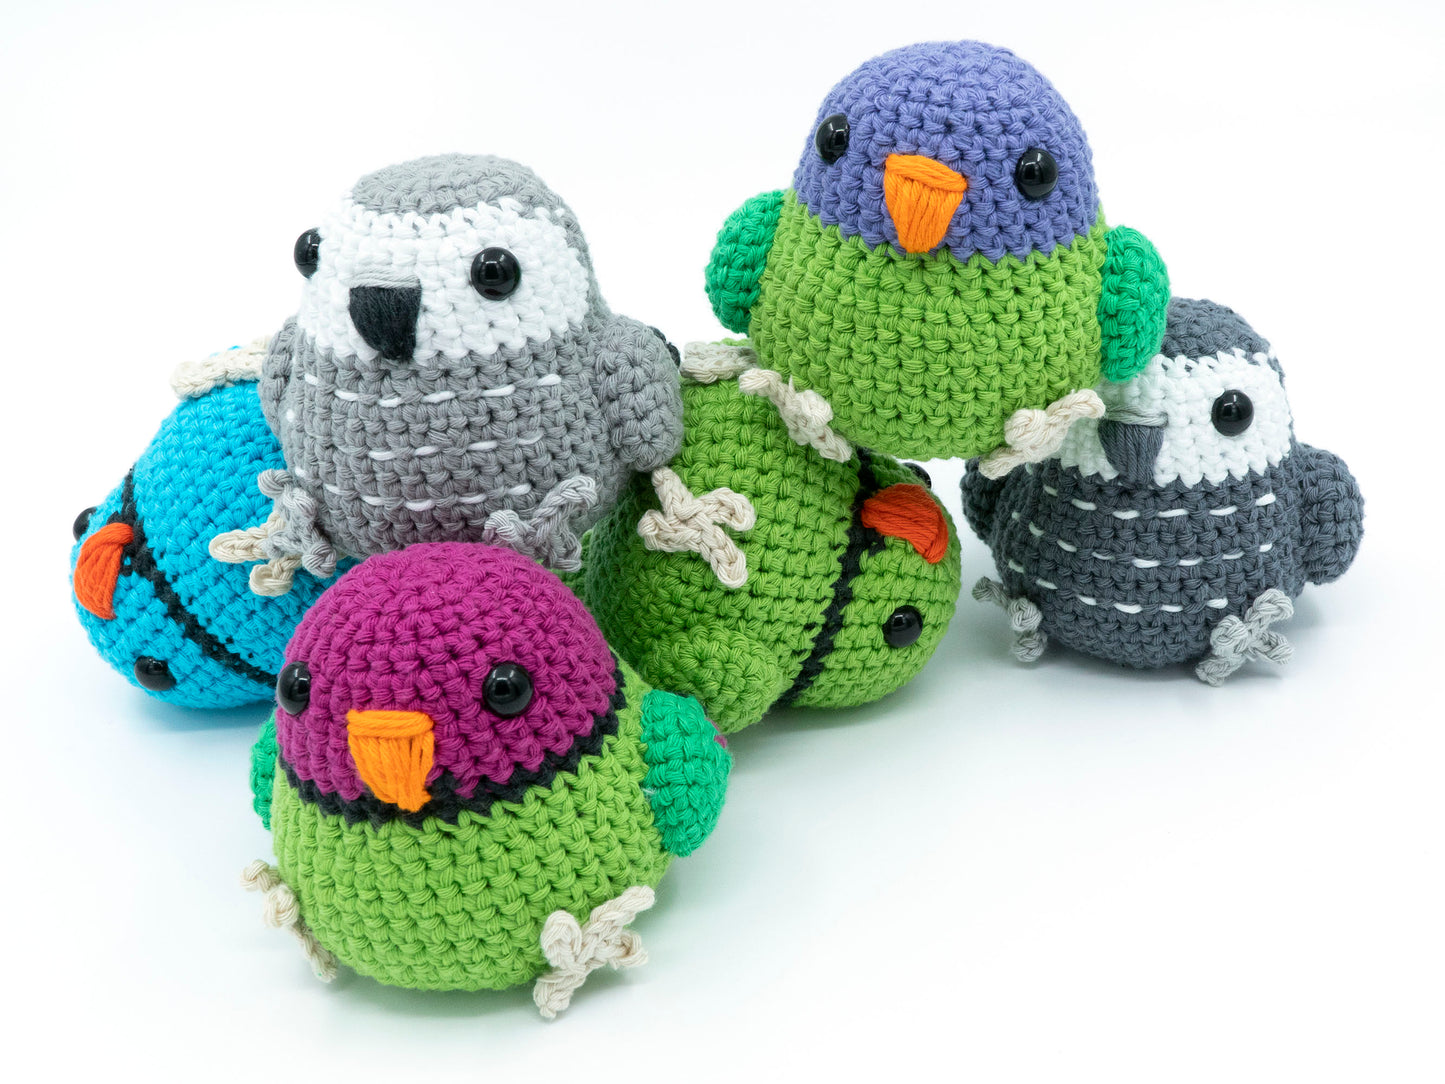 amigurumi crochet parrot pattern bundle with african grey plum-headed parakeet and indian ringneck stacked in a pile